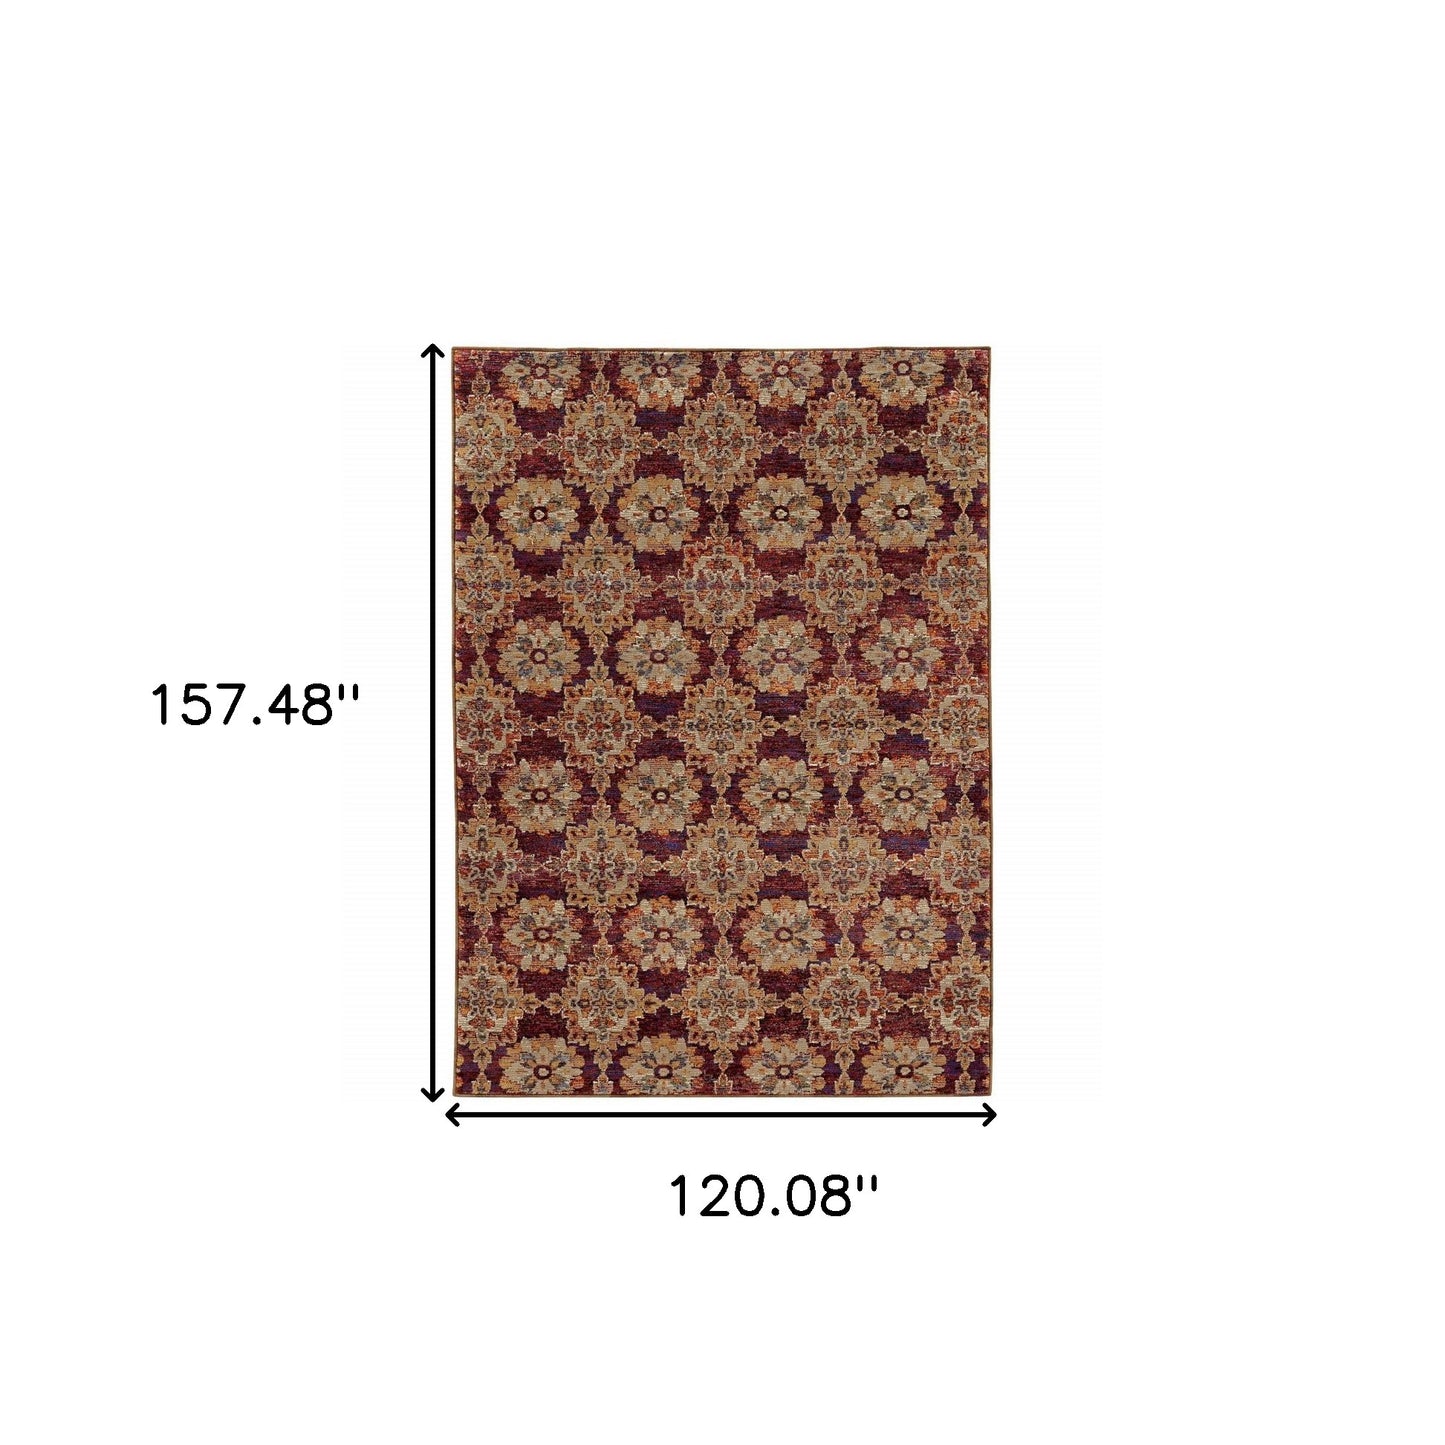 10' x 13' Red and Gold Oriental Power Loom Area Rug